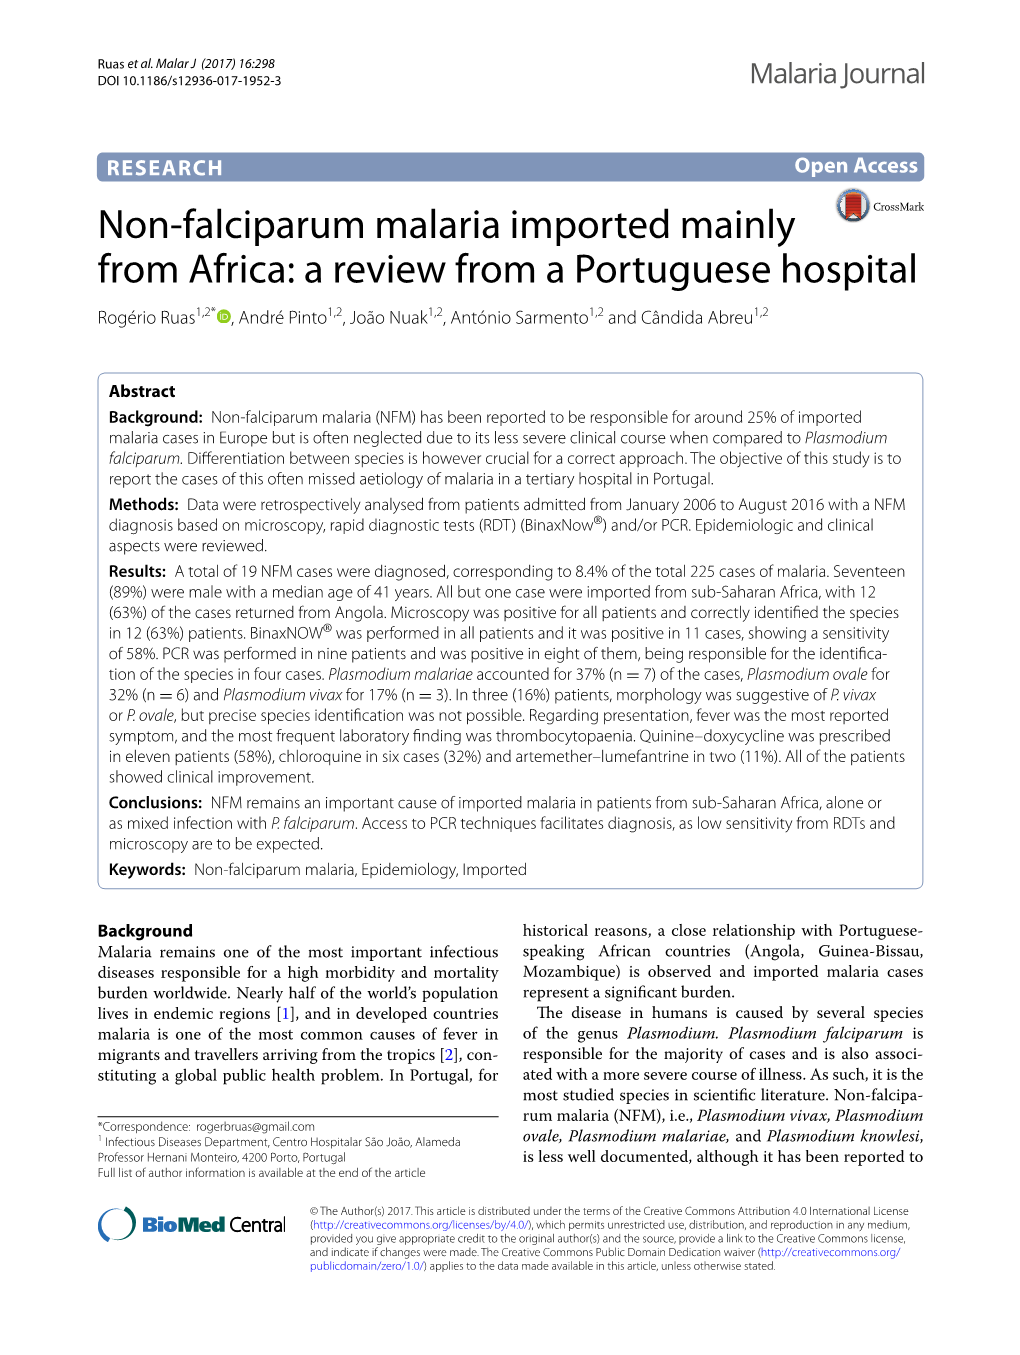 Non-Falciparum Malaria Imported Mainly from Africa